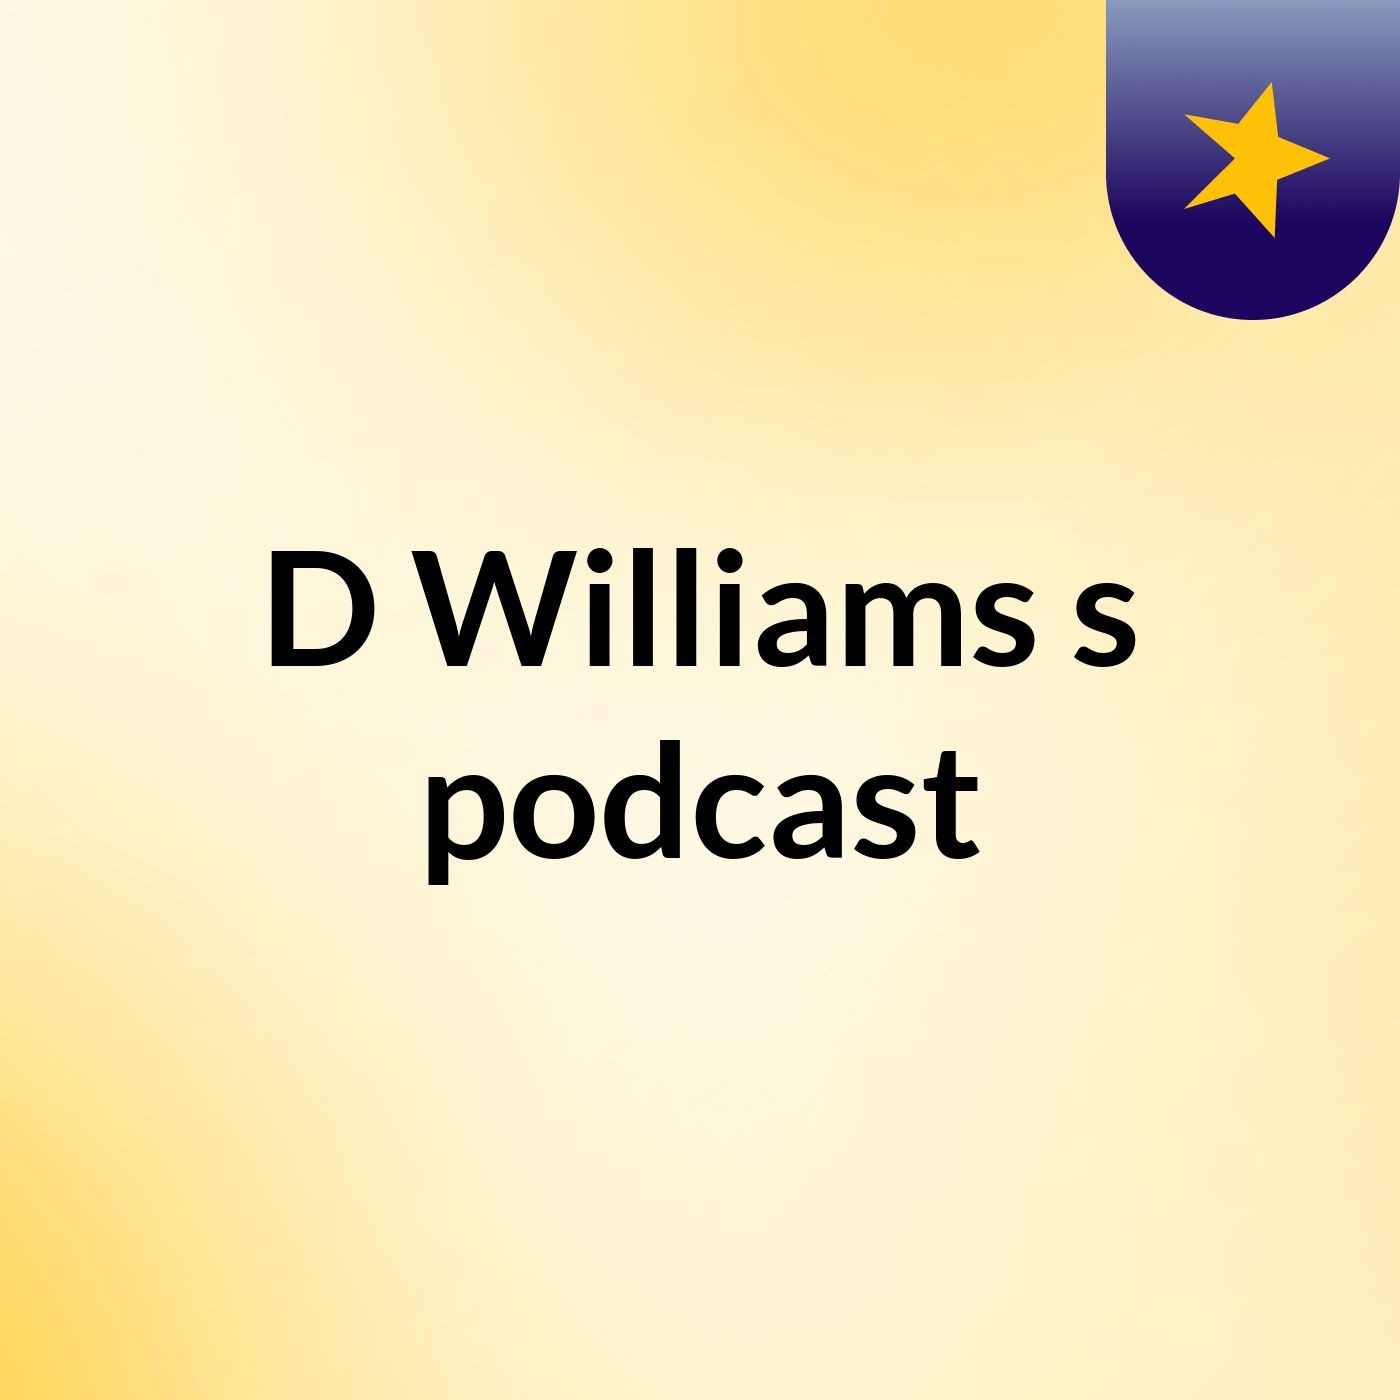 Episode 1 - D Williams's podcast